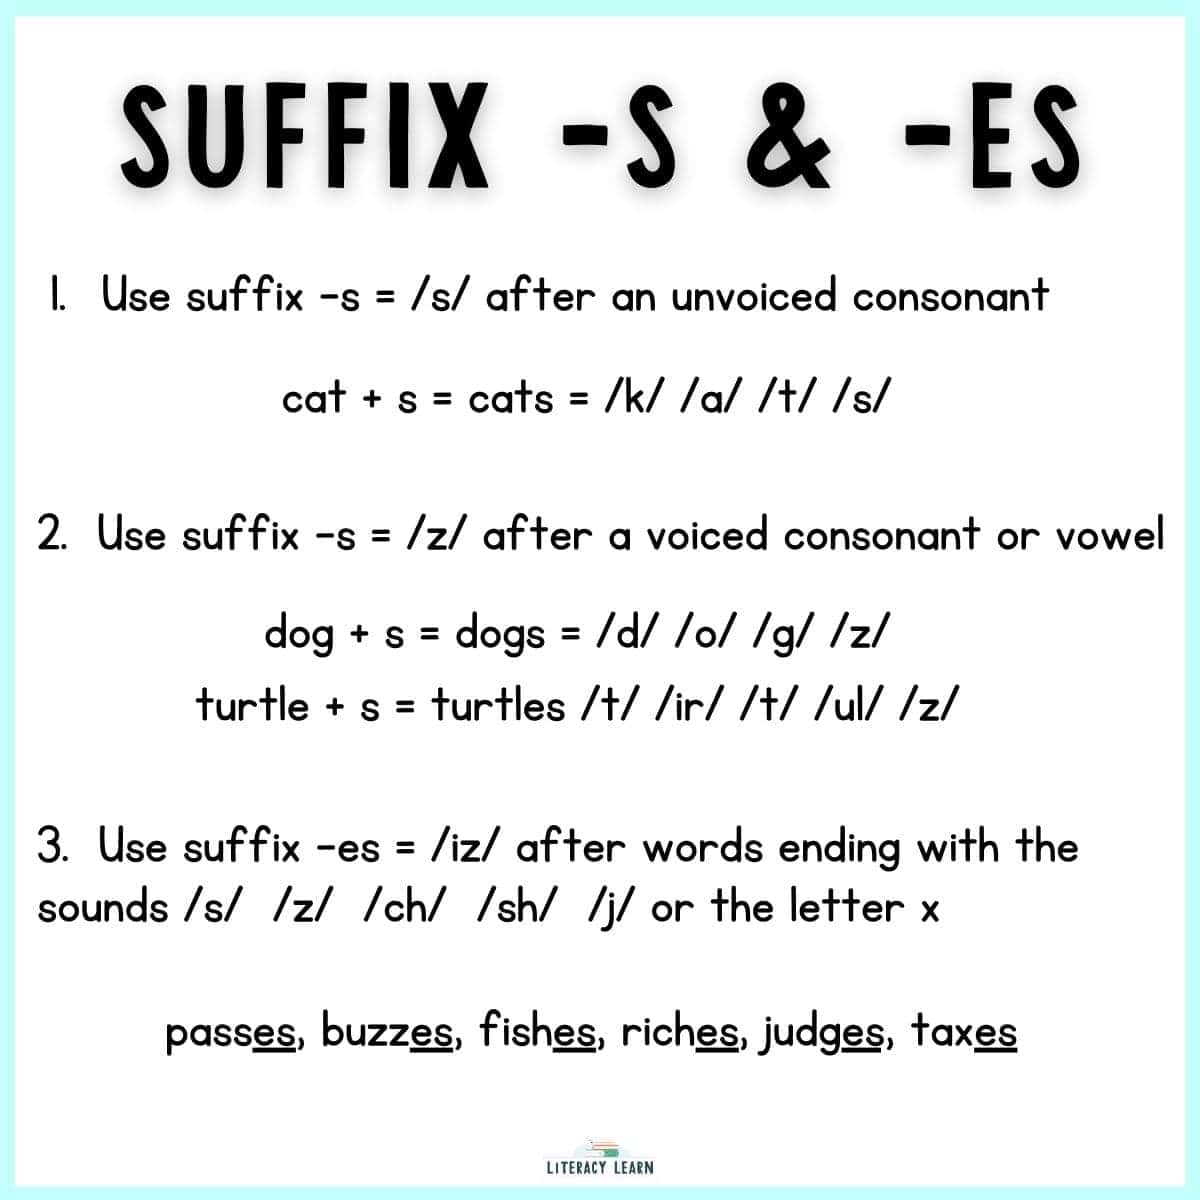 Graphic entitled "Suffix -s and -es with sounds and rules.